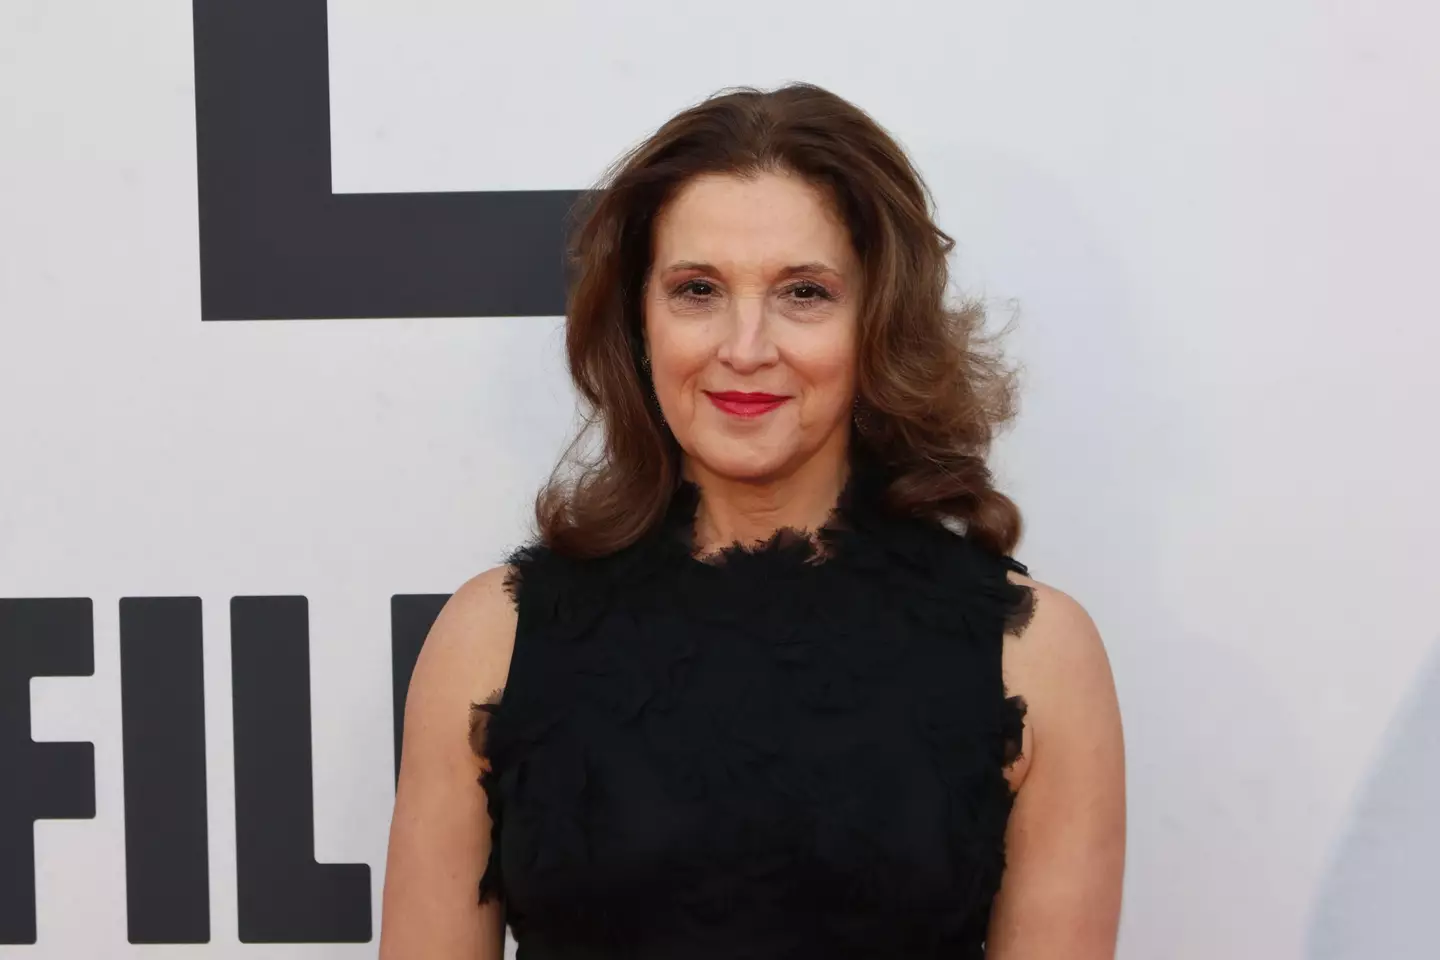 Barbara Broccoli said that there isn't even a script yet for the next Bond movie.